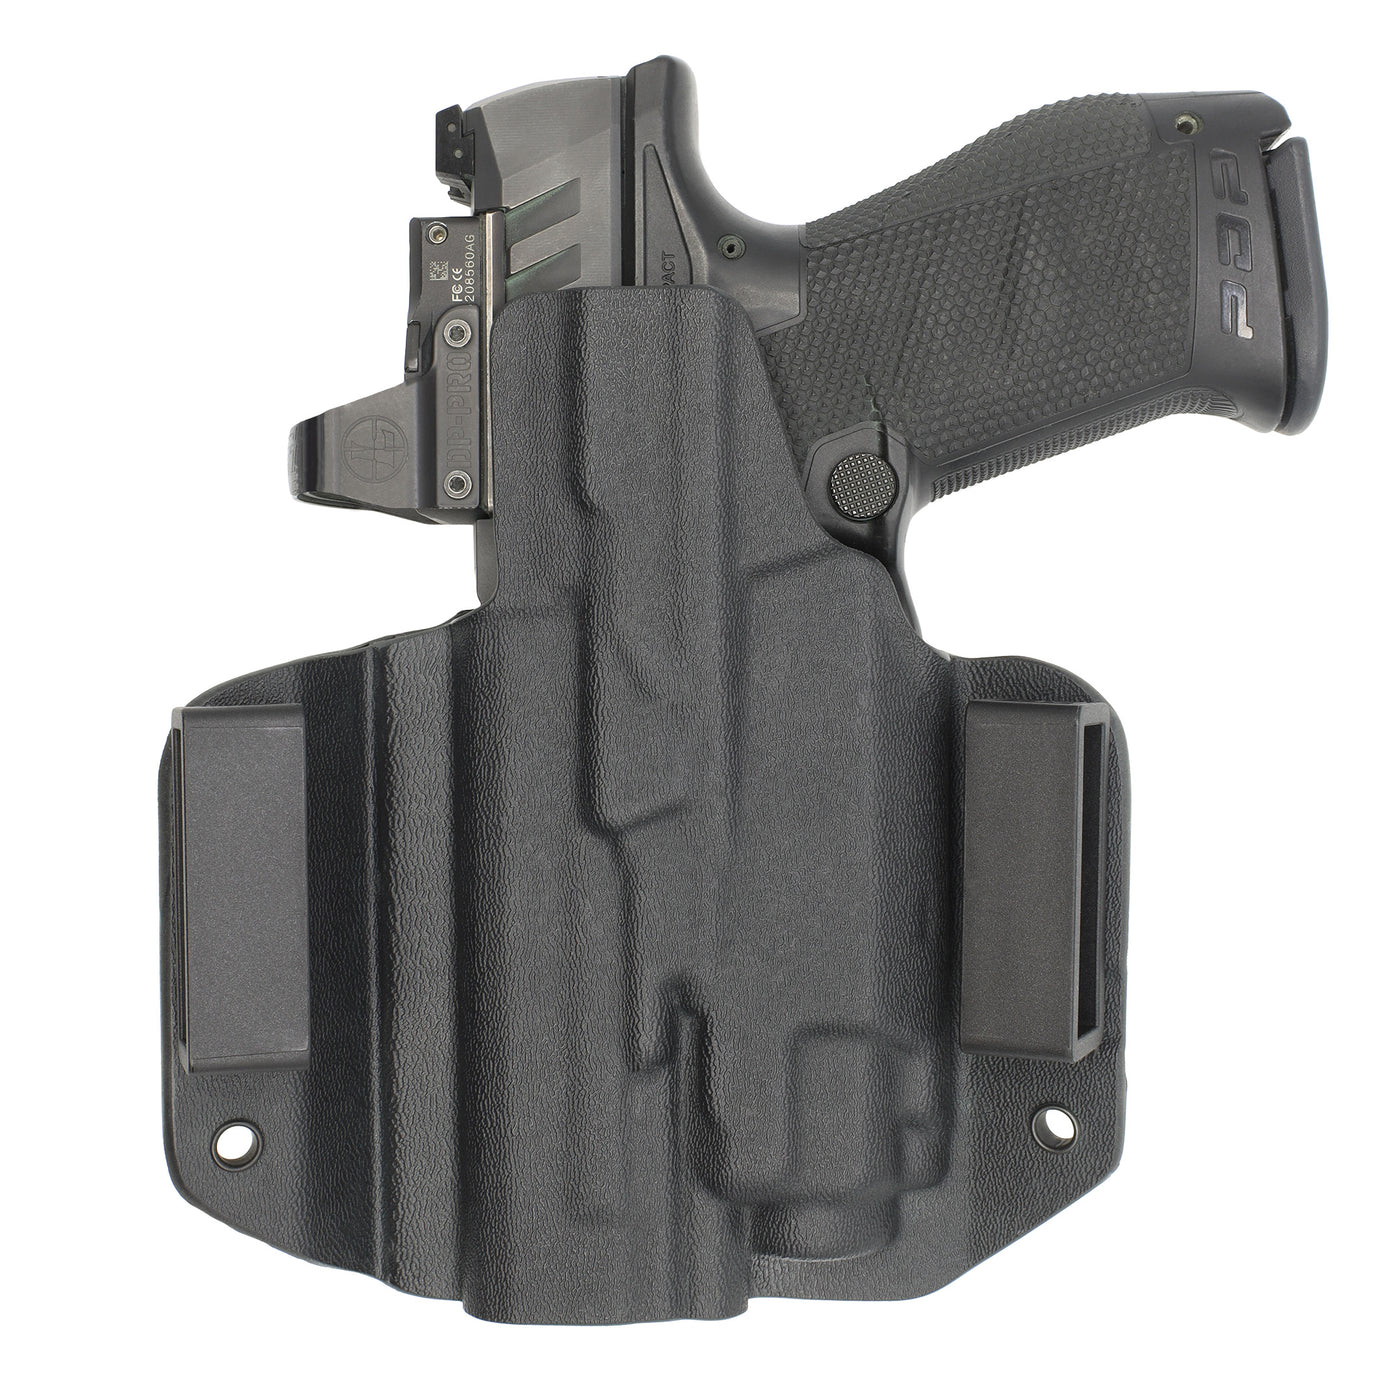 C&G Holsters custom OWB tactical M&P 9/40 streamlight TLR8 holstered back view